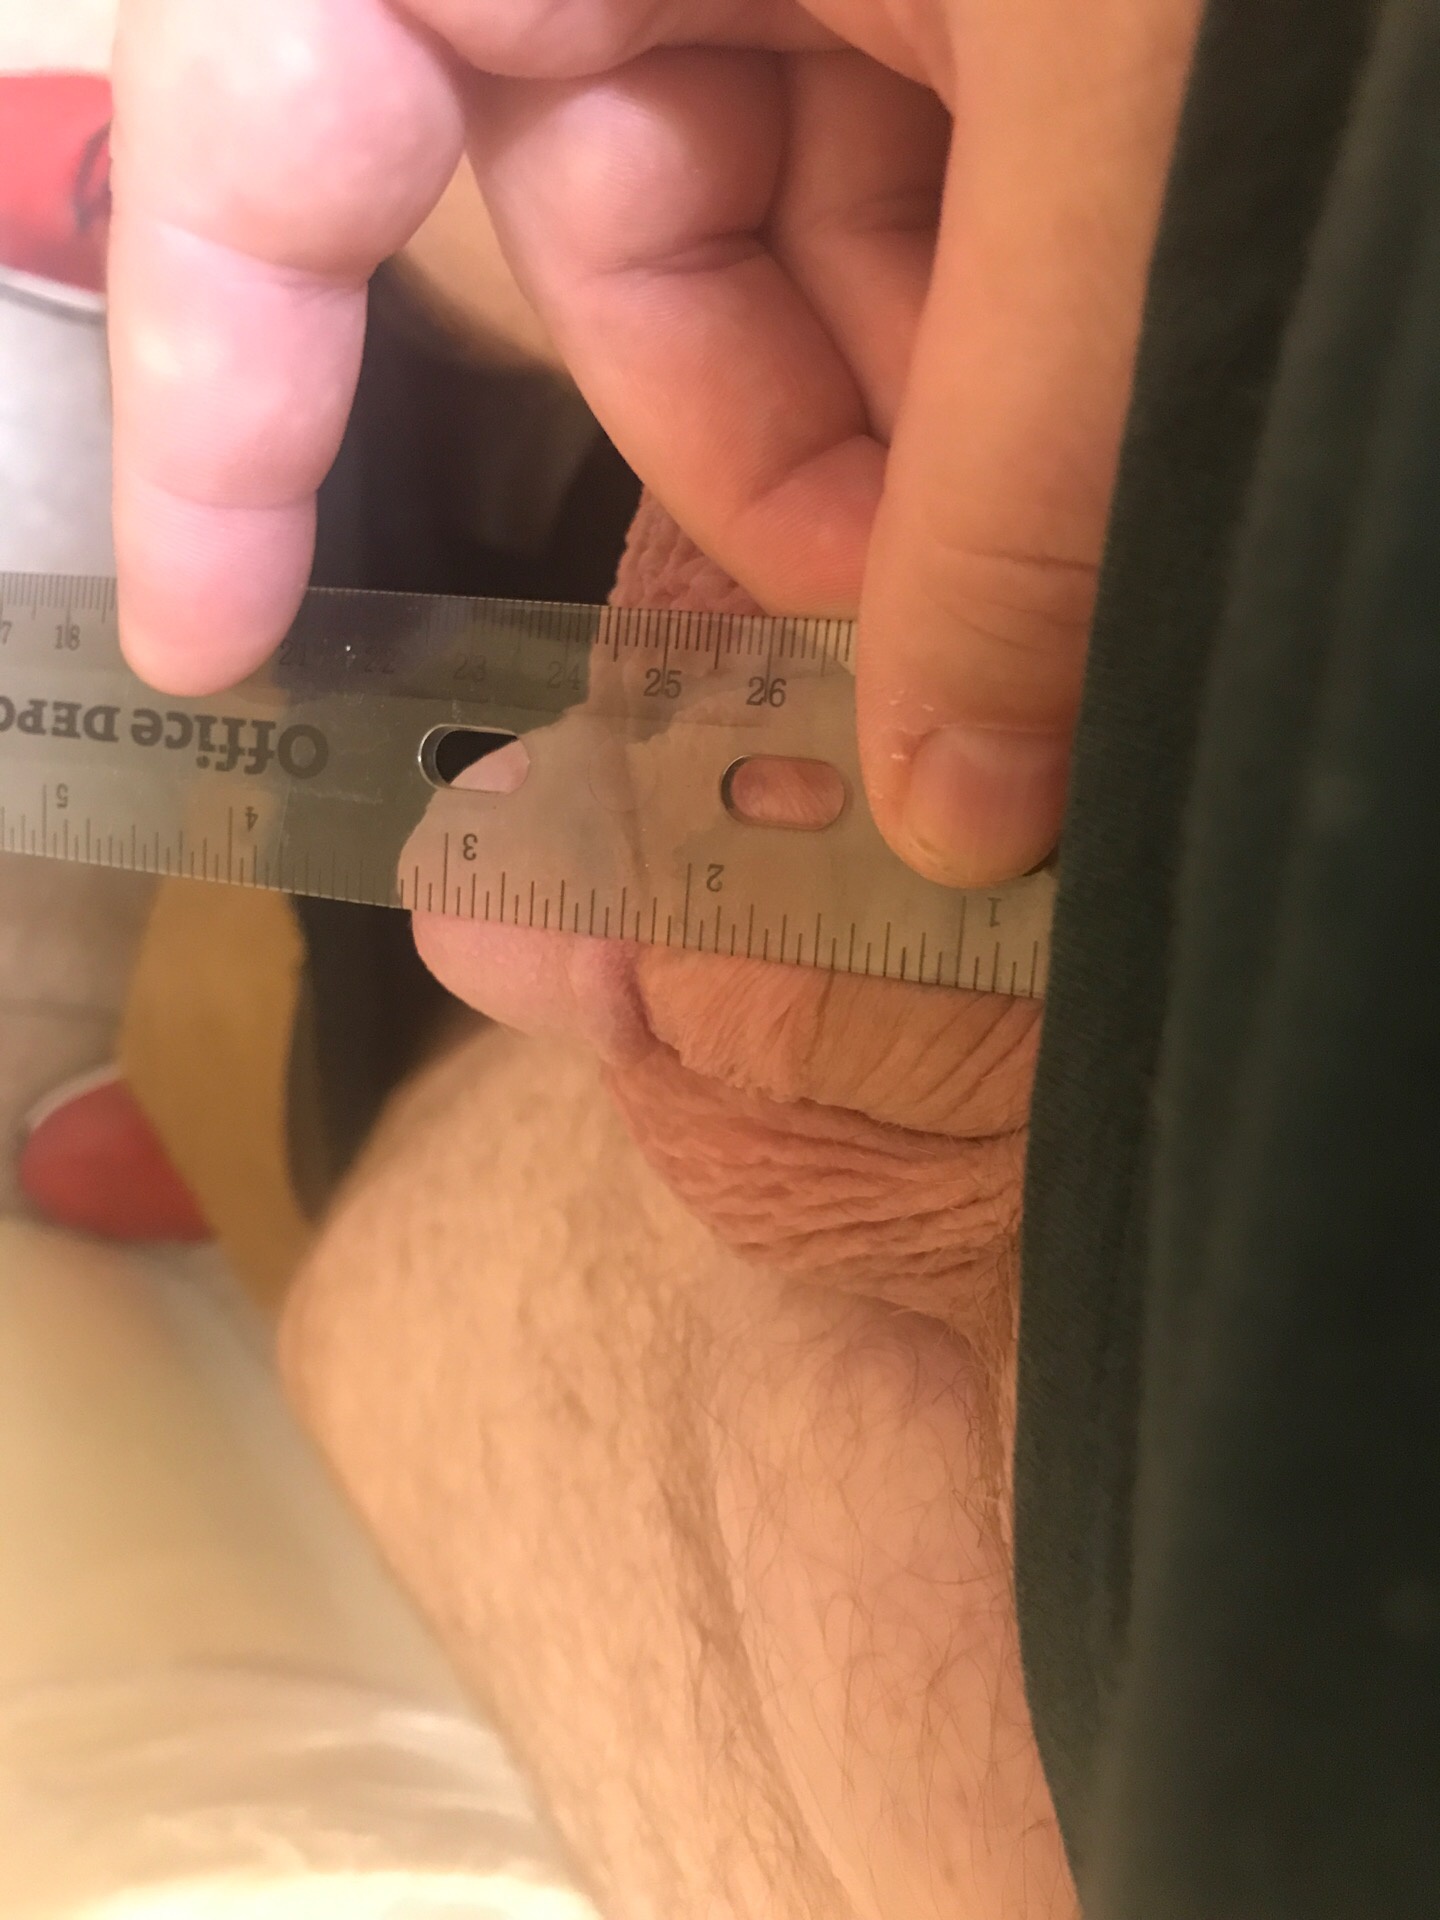 davis crow share 5 inch penis picture photos